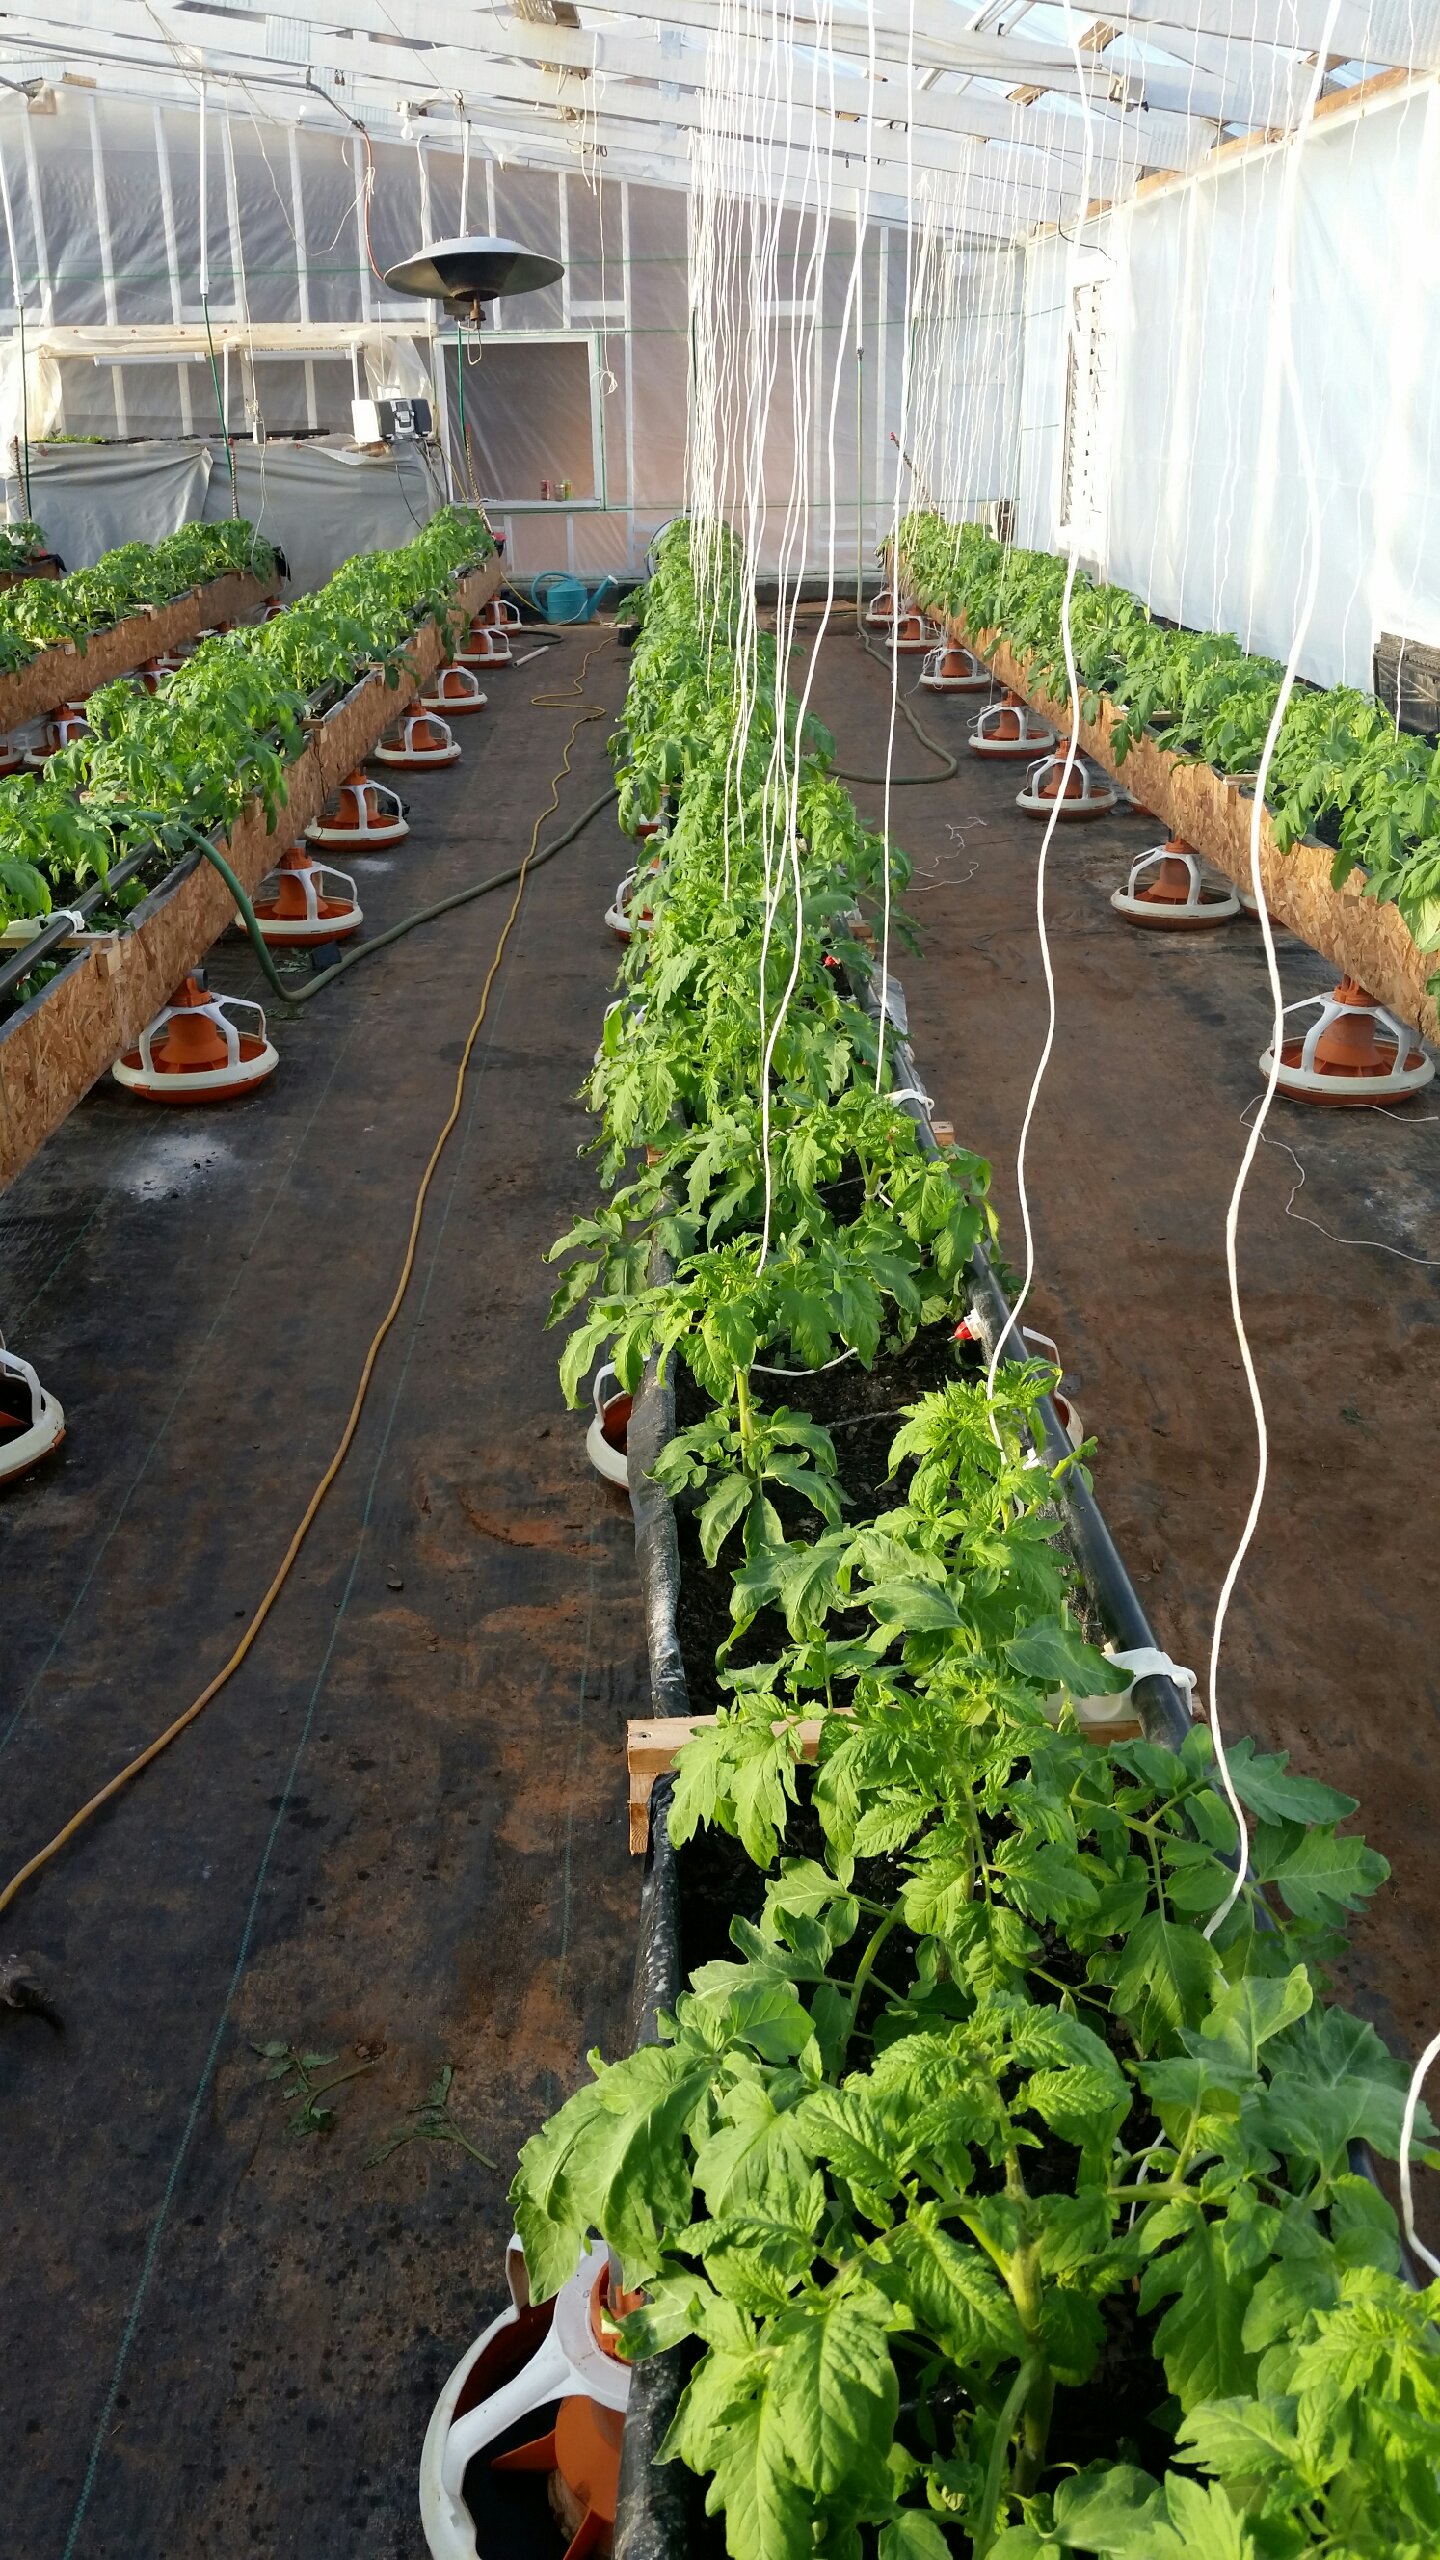 Holding up the tomato plants with string